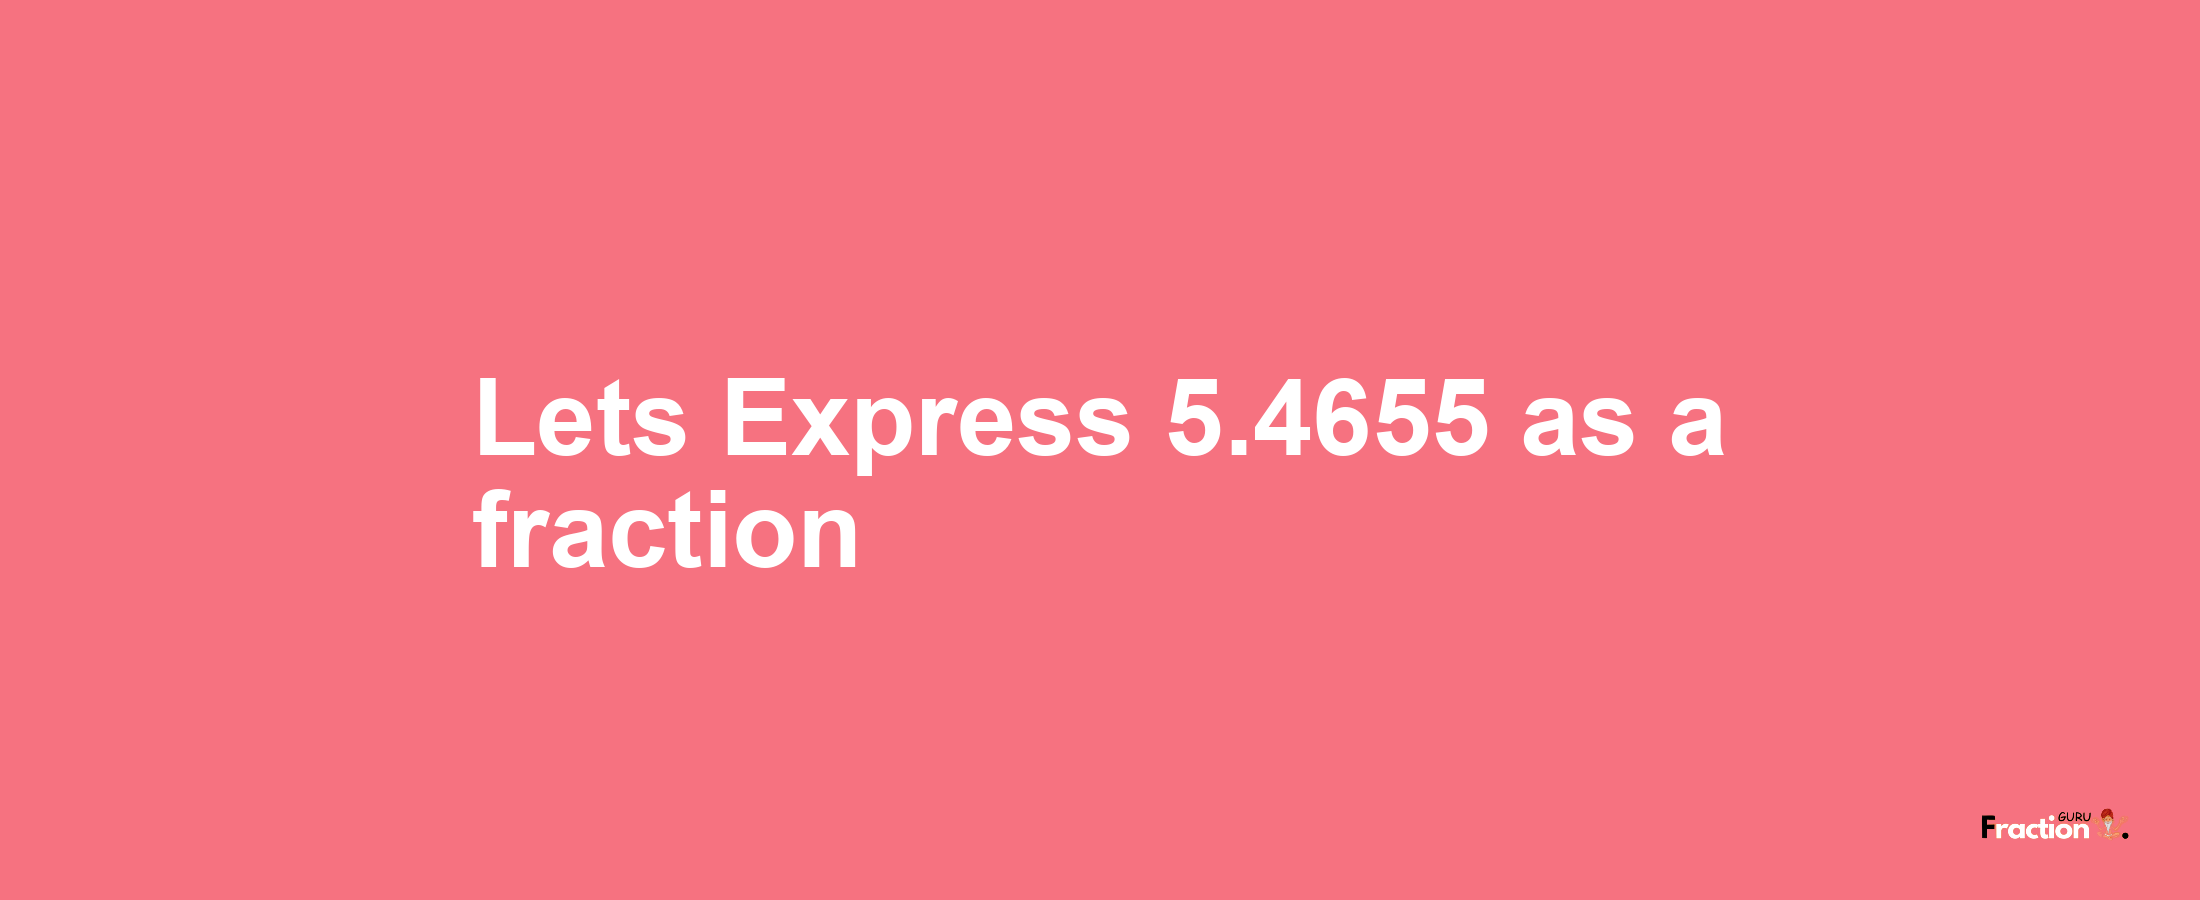 Lets Express 5.4655 as afraction